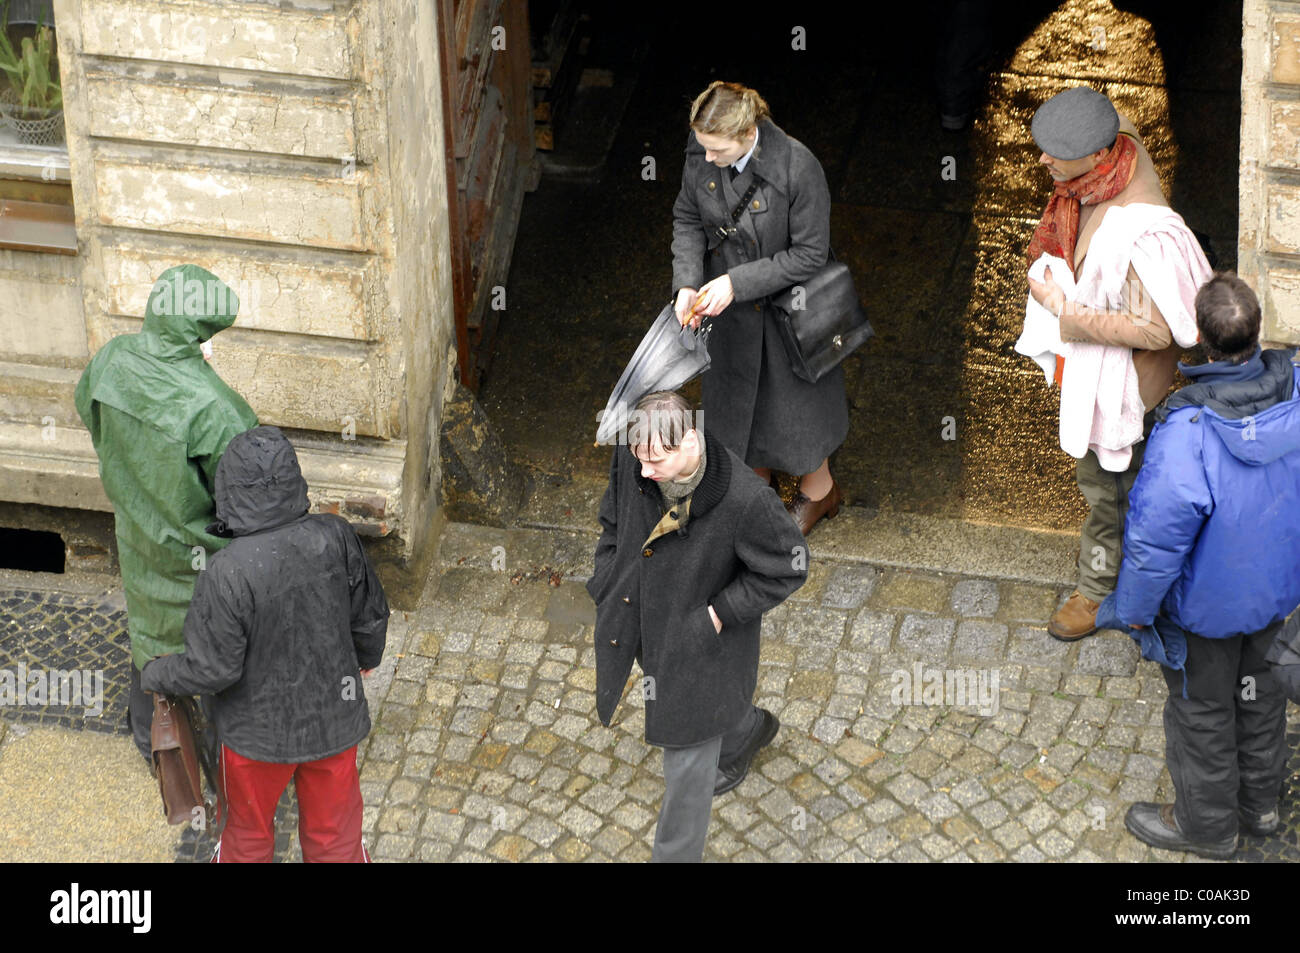 Kate Winslet, David Kross on the set of 'The Reader' in Goerlitz, Saxonia Goerlitz, Germany - 03.03.08 **Not available for Stock Photo